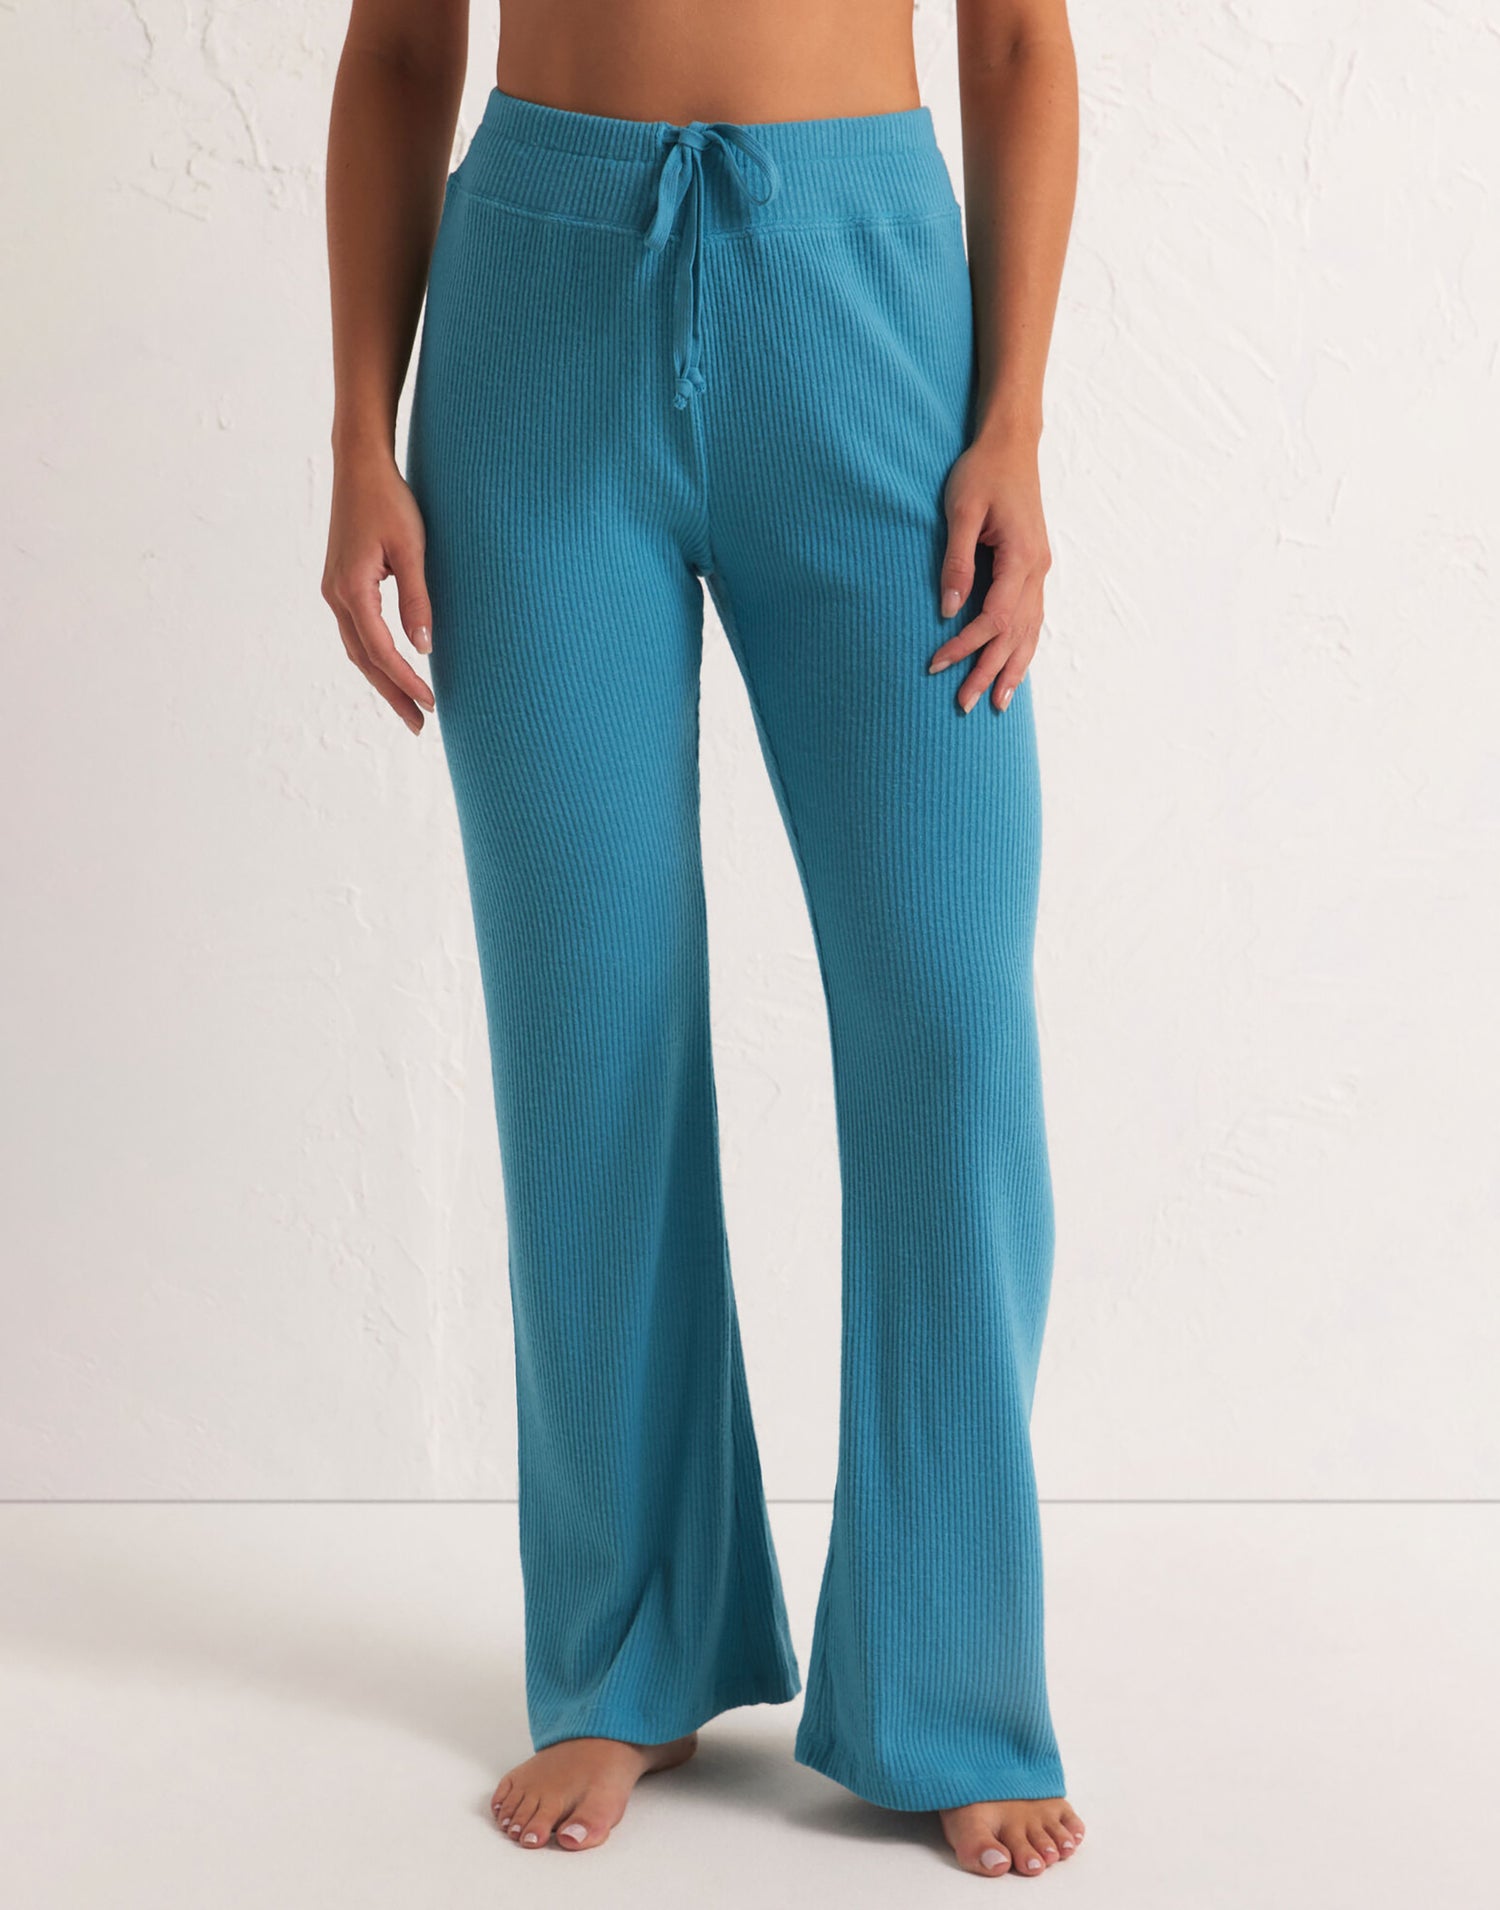 Beach Walk Rib Flare Lounge Pant by Z Supply in Bermuda Blue - Front View